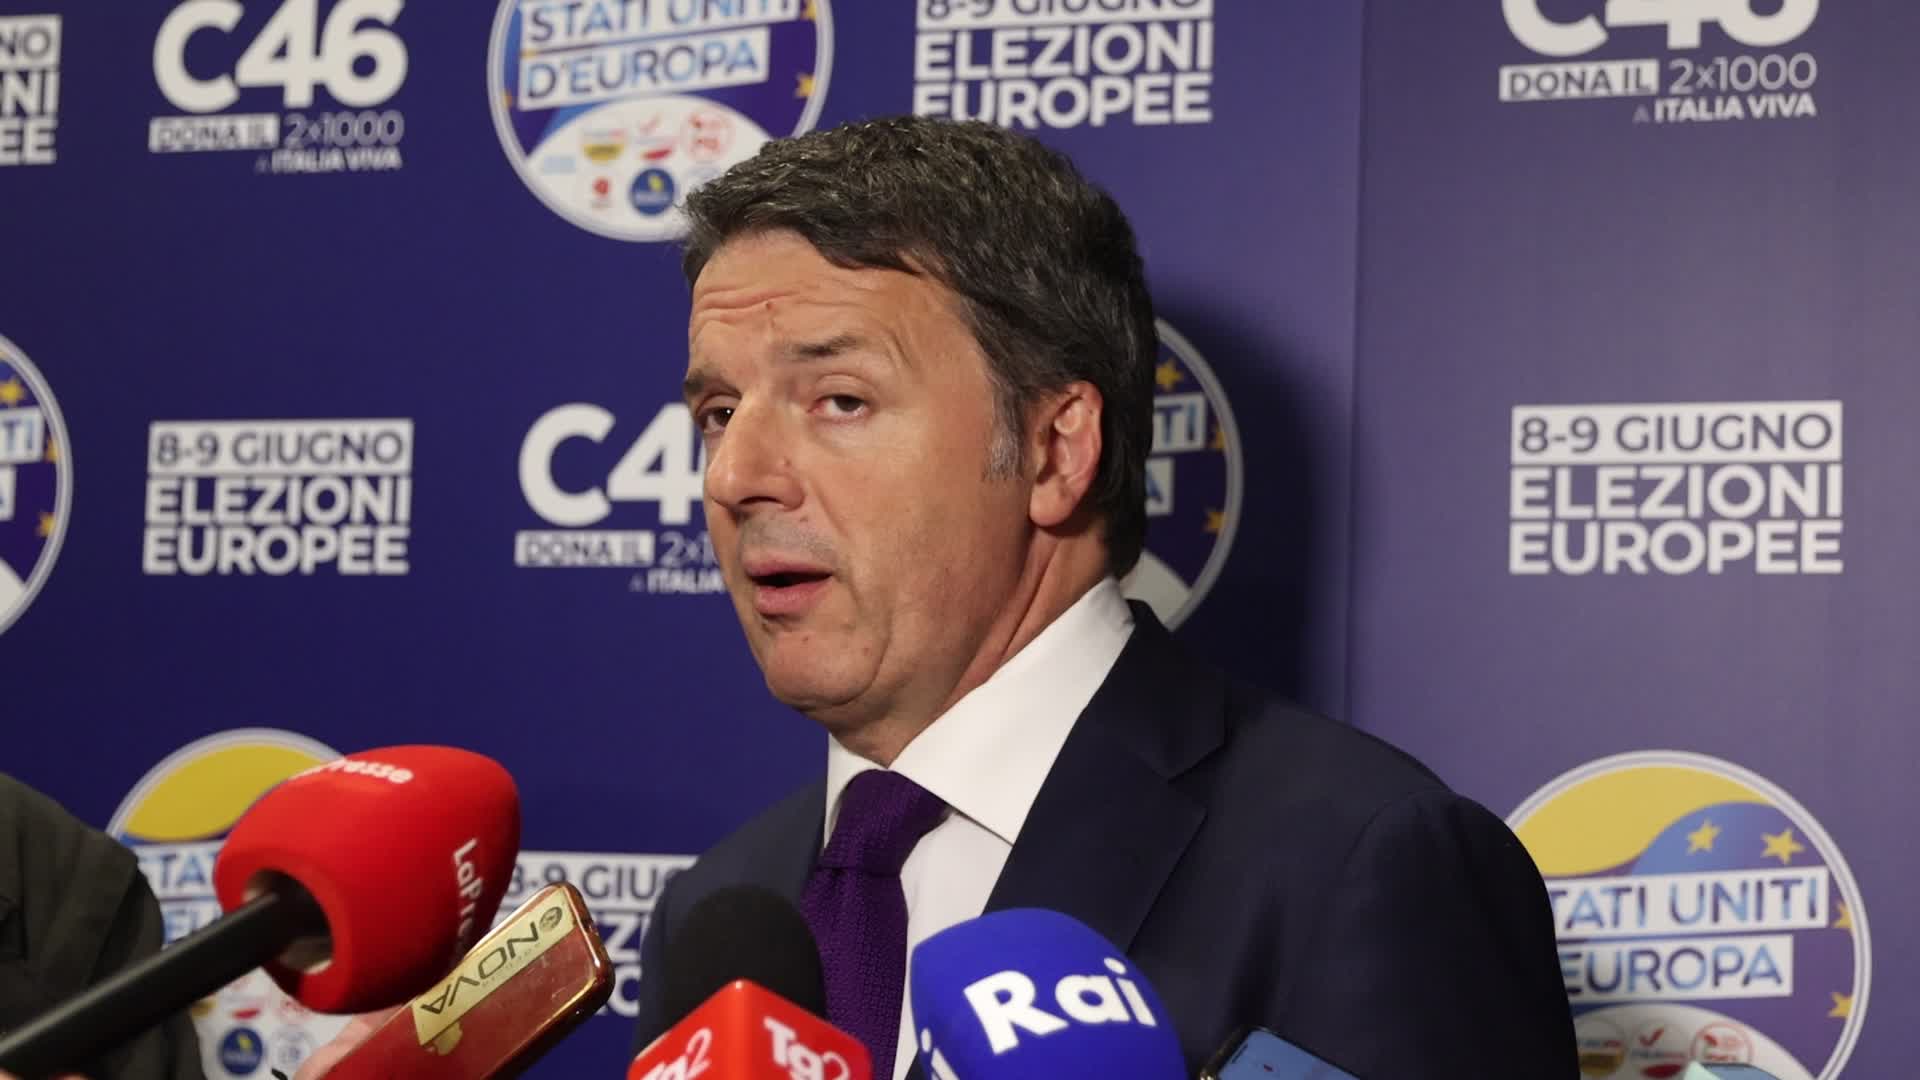 Matteo Renzi presents his candidacy for the European Elections 2024 with the list Stati Uniti d'Europa in Milan